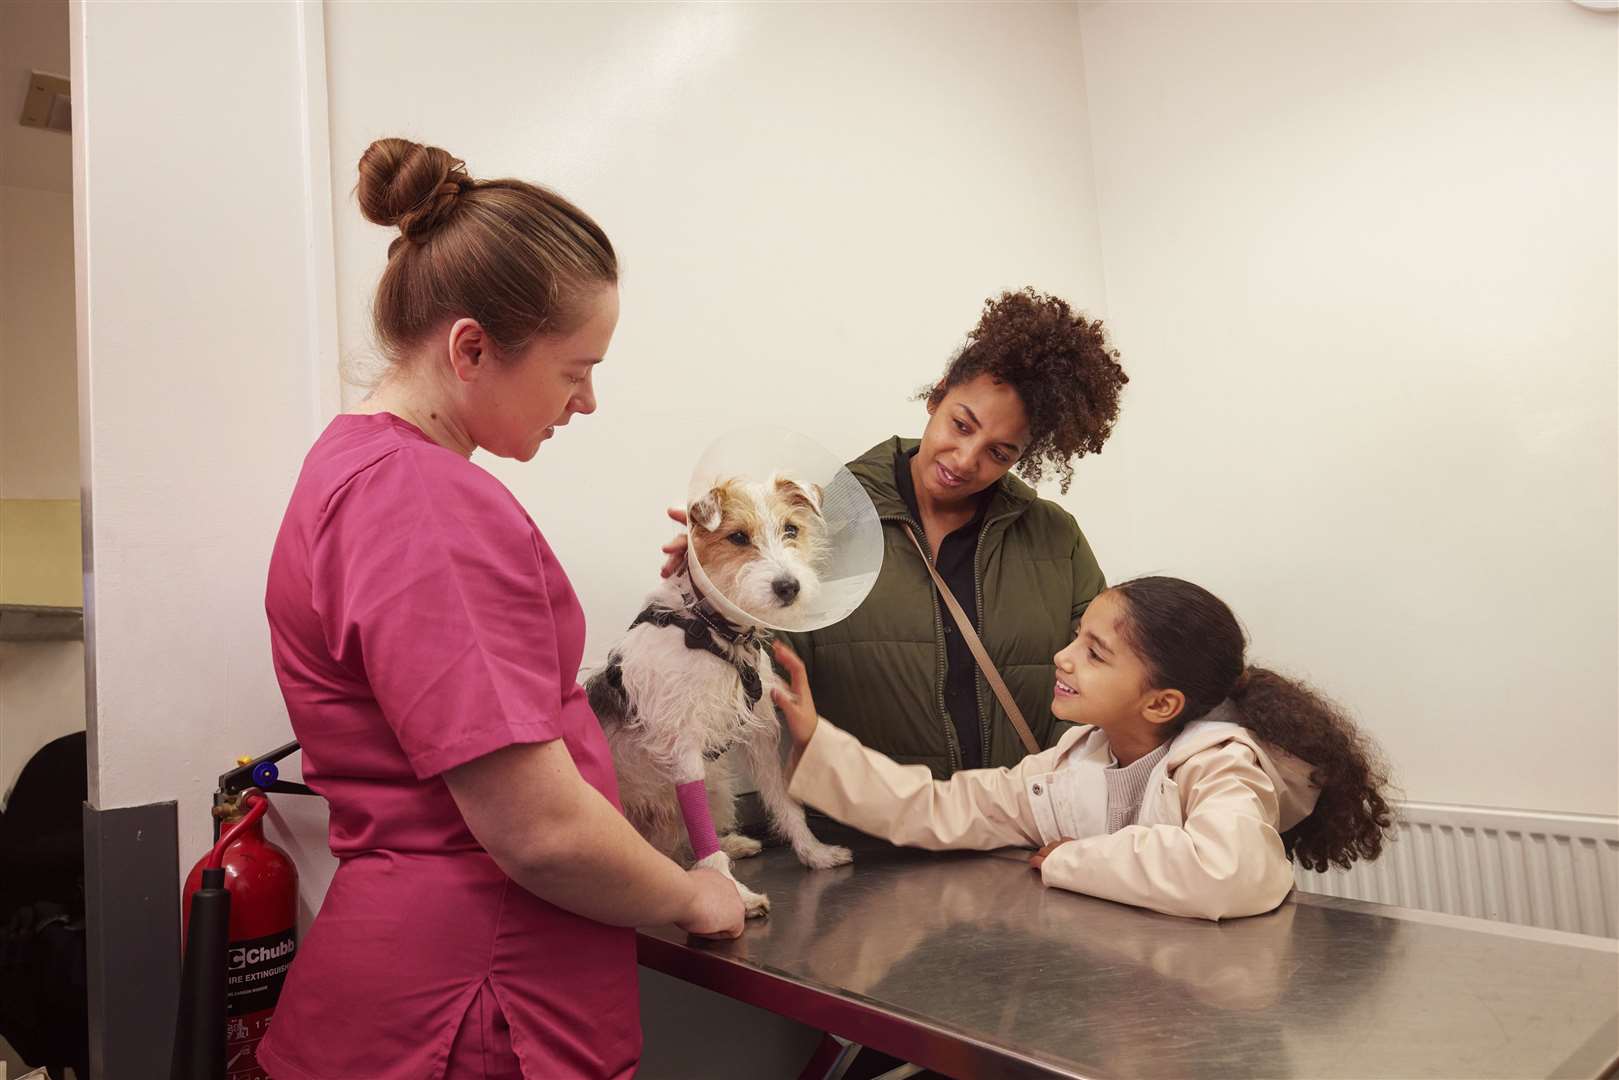 PDSA has treated nearly 400,000 animals in the past year.